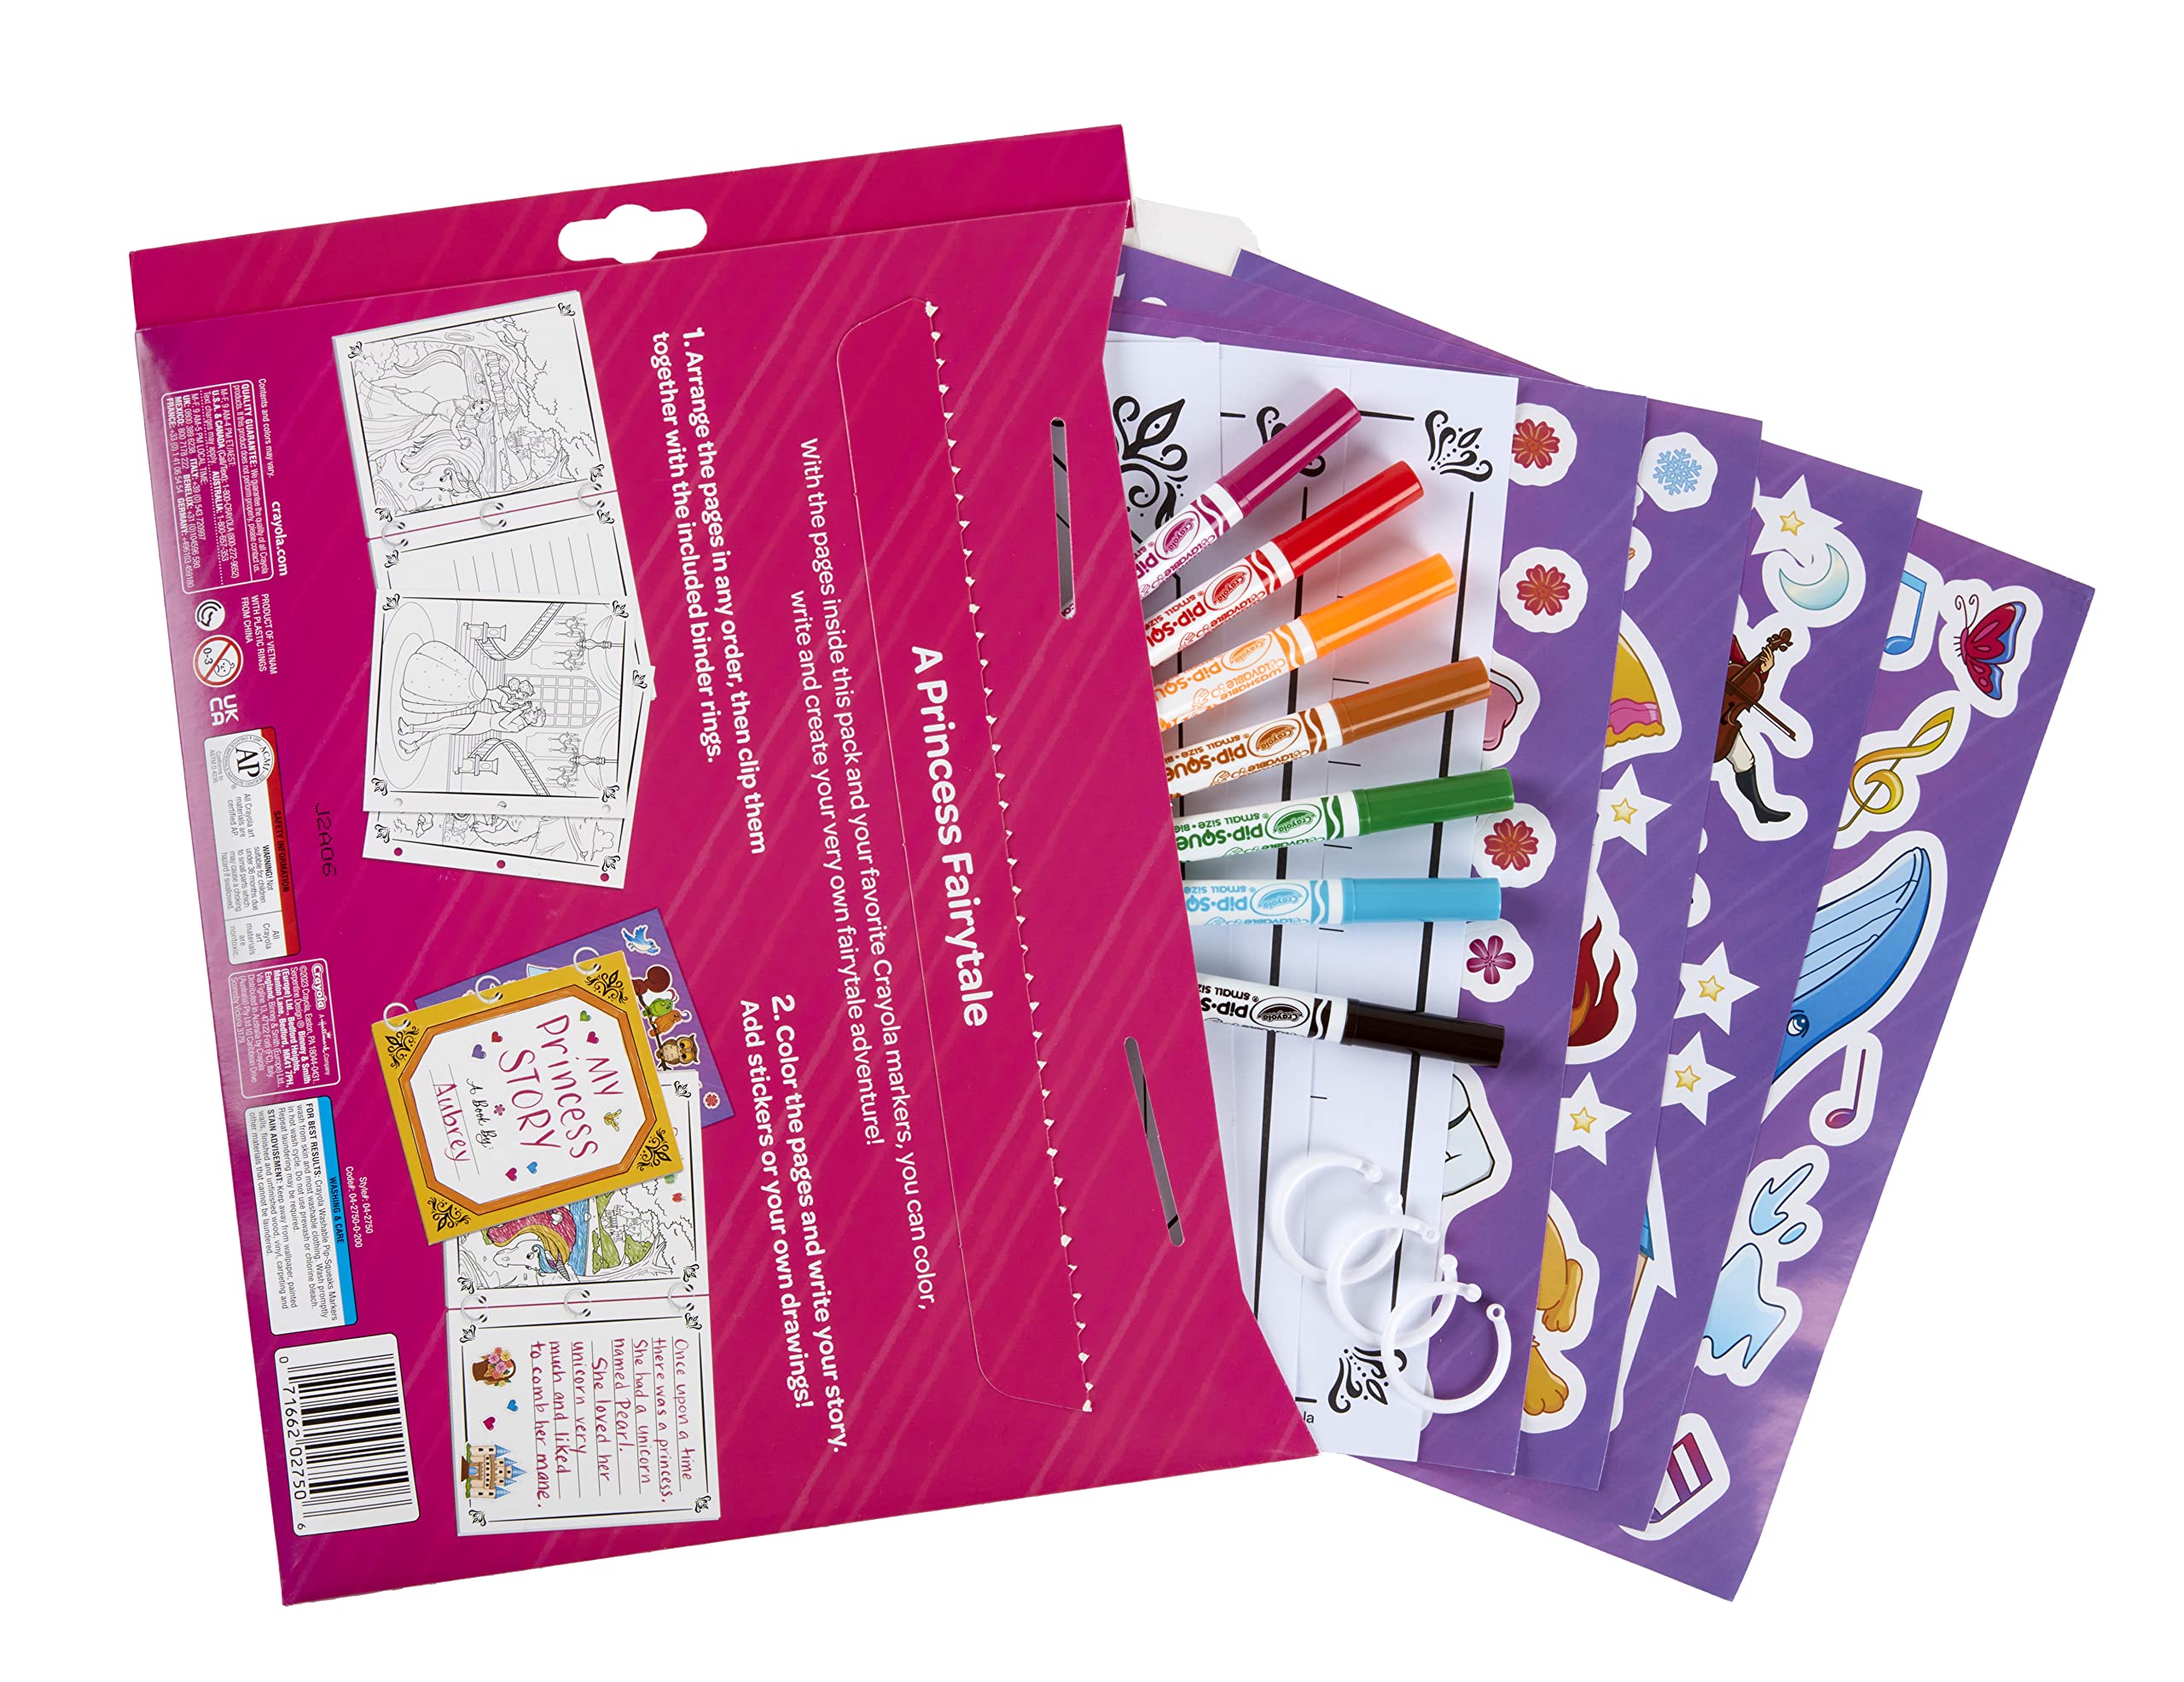 Crayola Book Making Kit for Kids, Fairytale Storybook, DIY Kits for Girls & Boys, Ages 6, 7, 8, 9